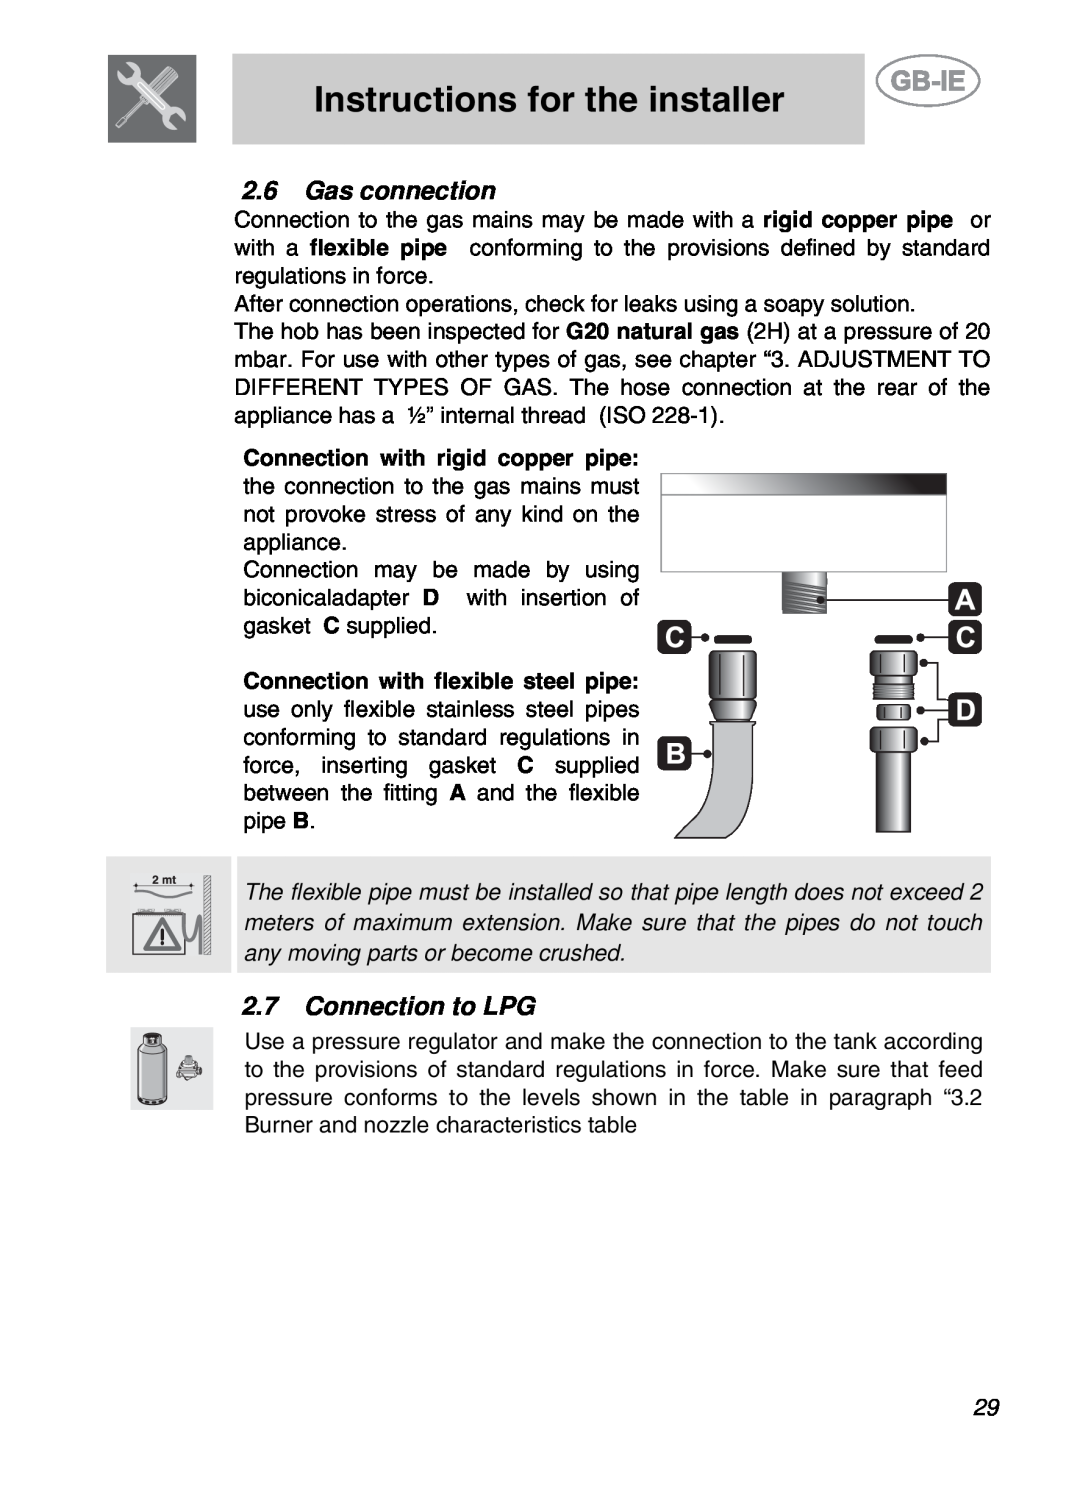 Smeg PGF95BE-2 Gas connection, Connection to LPG, Connection with rigid copper pipe, Connection with flexible steel pipe 